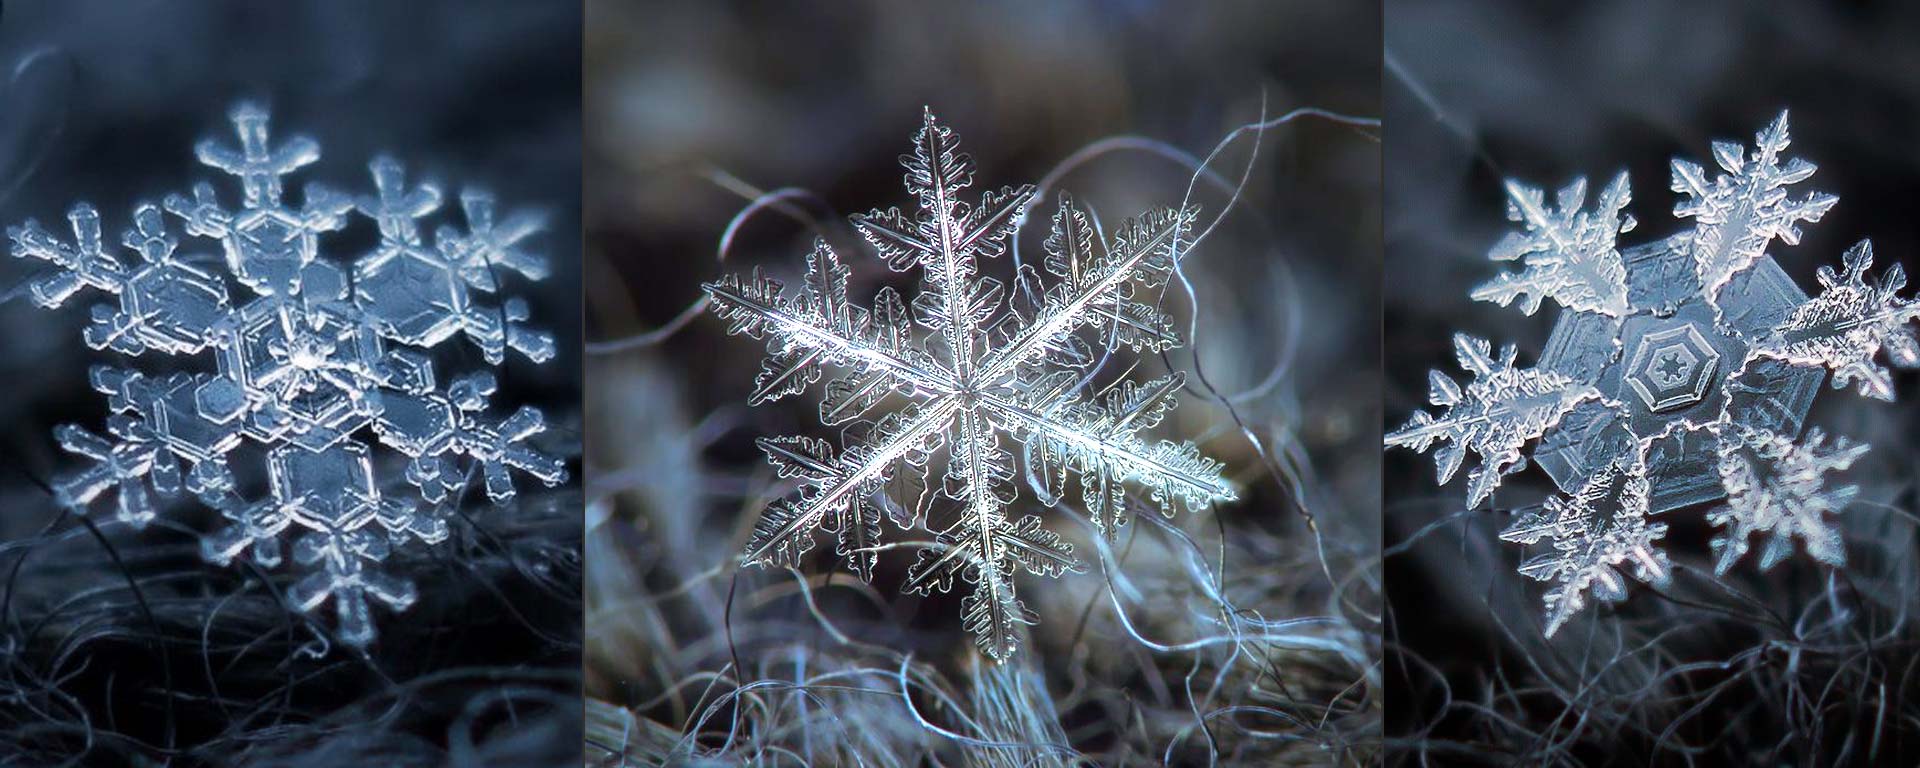 Featured Natural Beauty of Snowflakes